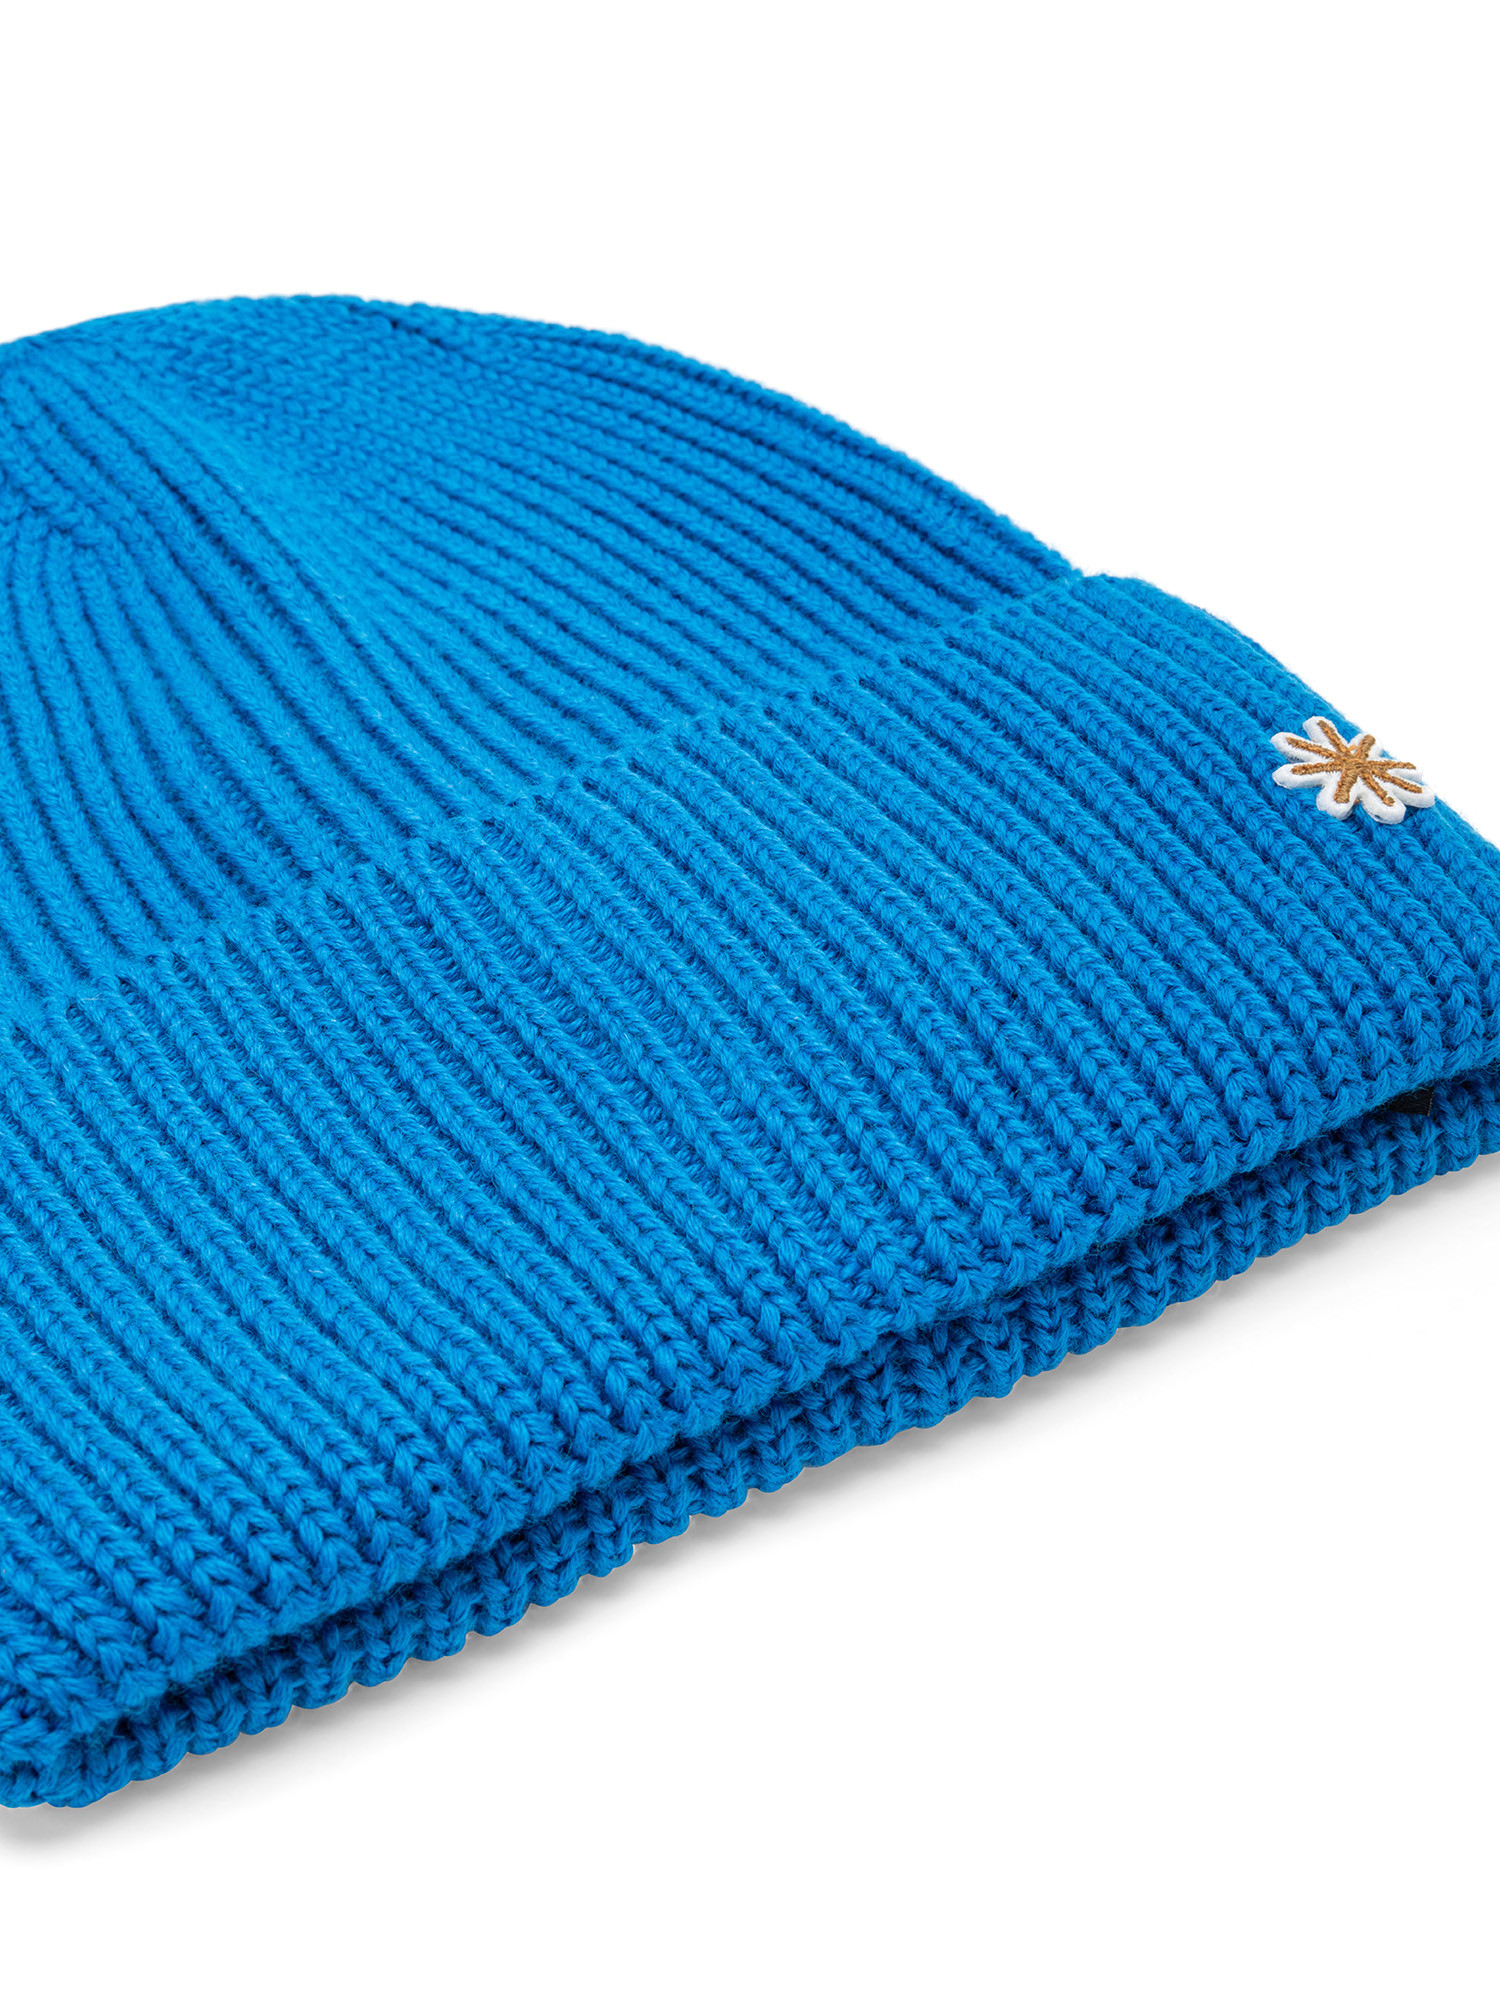 Cappello Beanie costa inglese, Blu, large image number 1